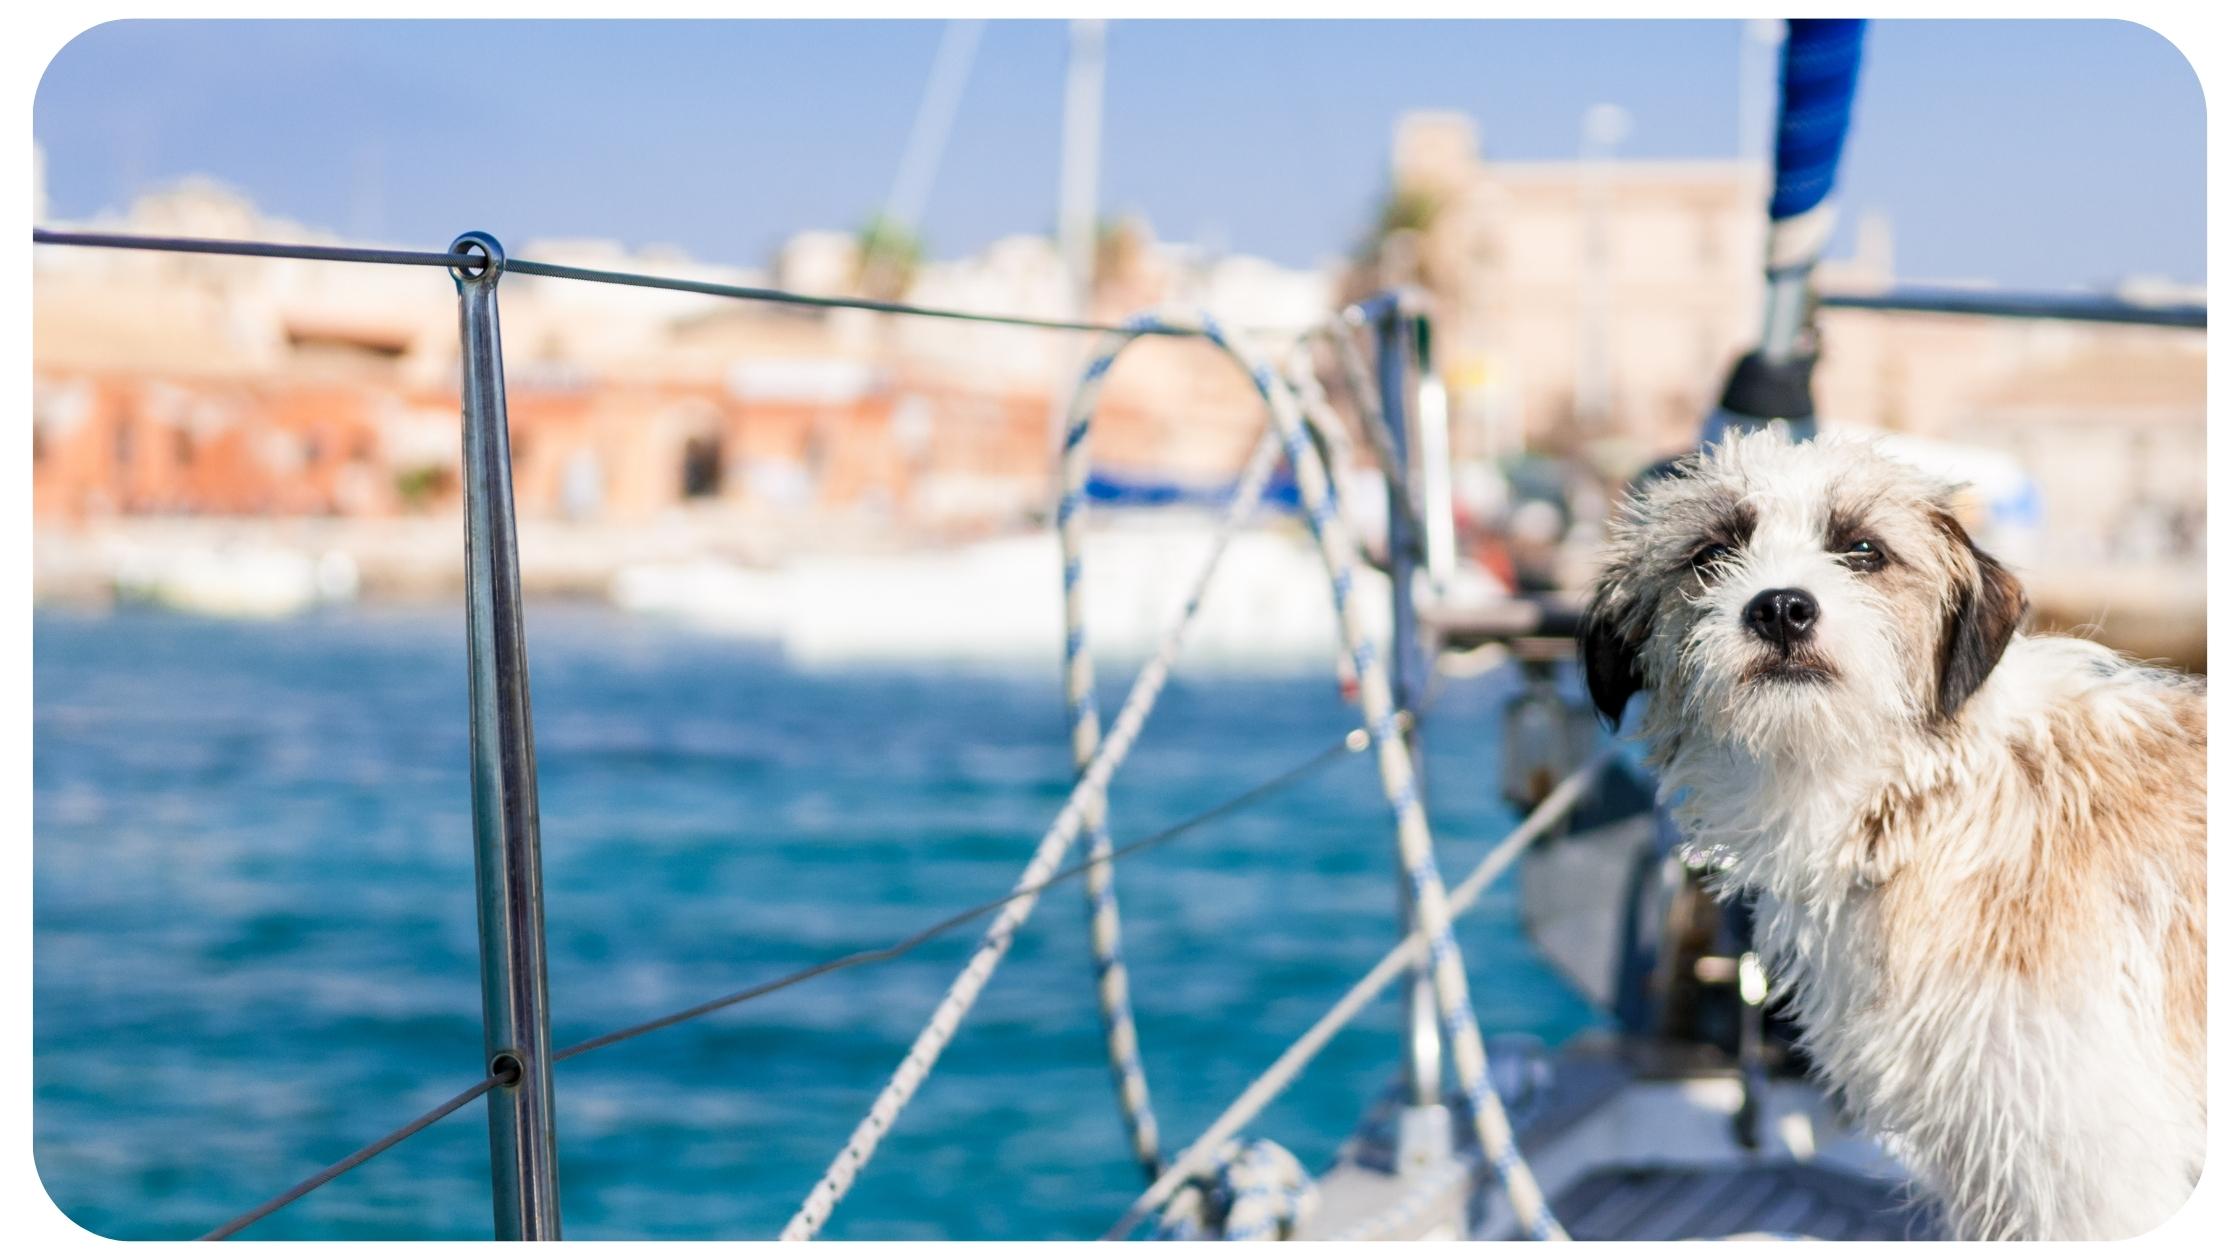 Sailing with Dogs – Our Guide to Taking Dogs on Sailboats